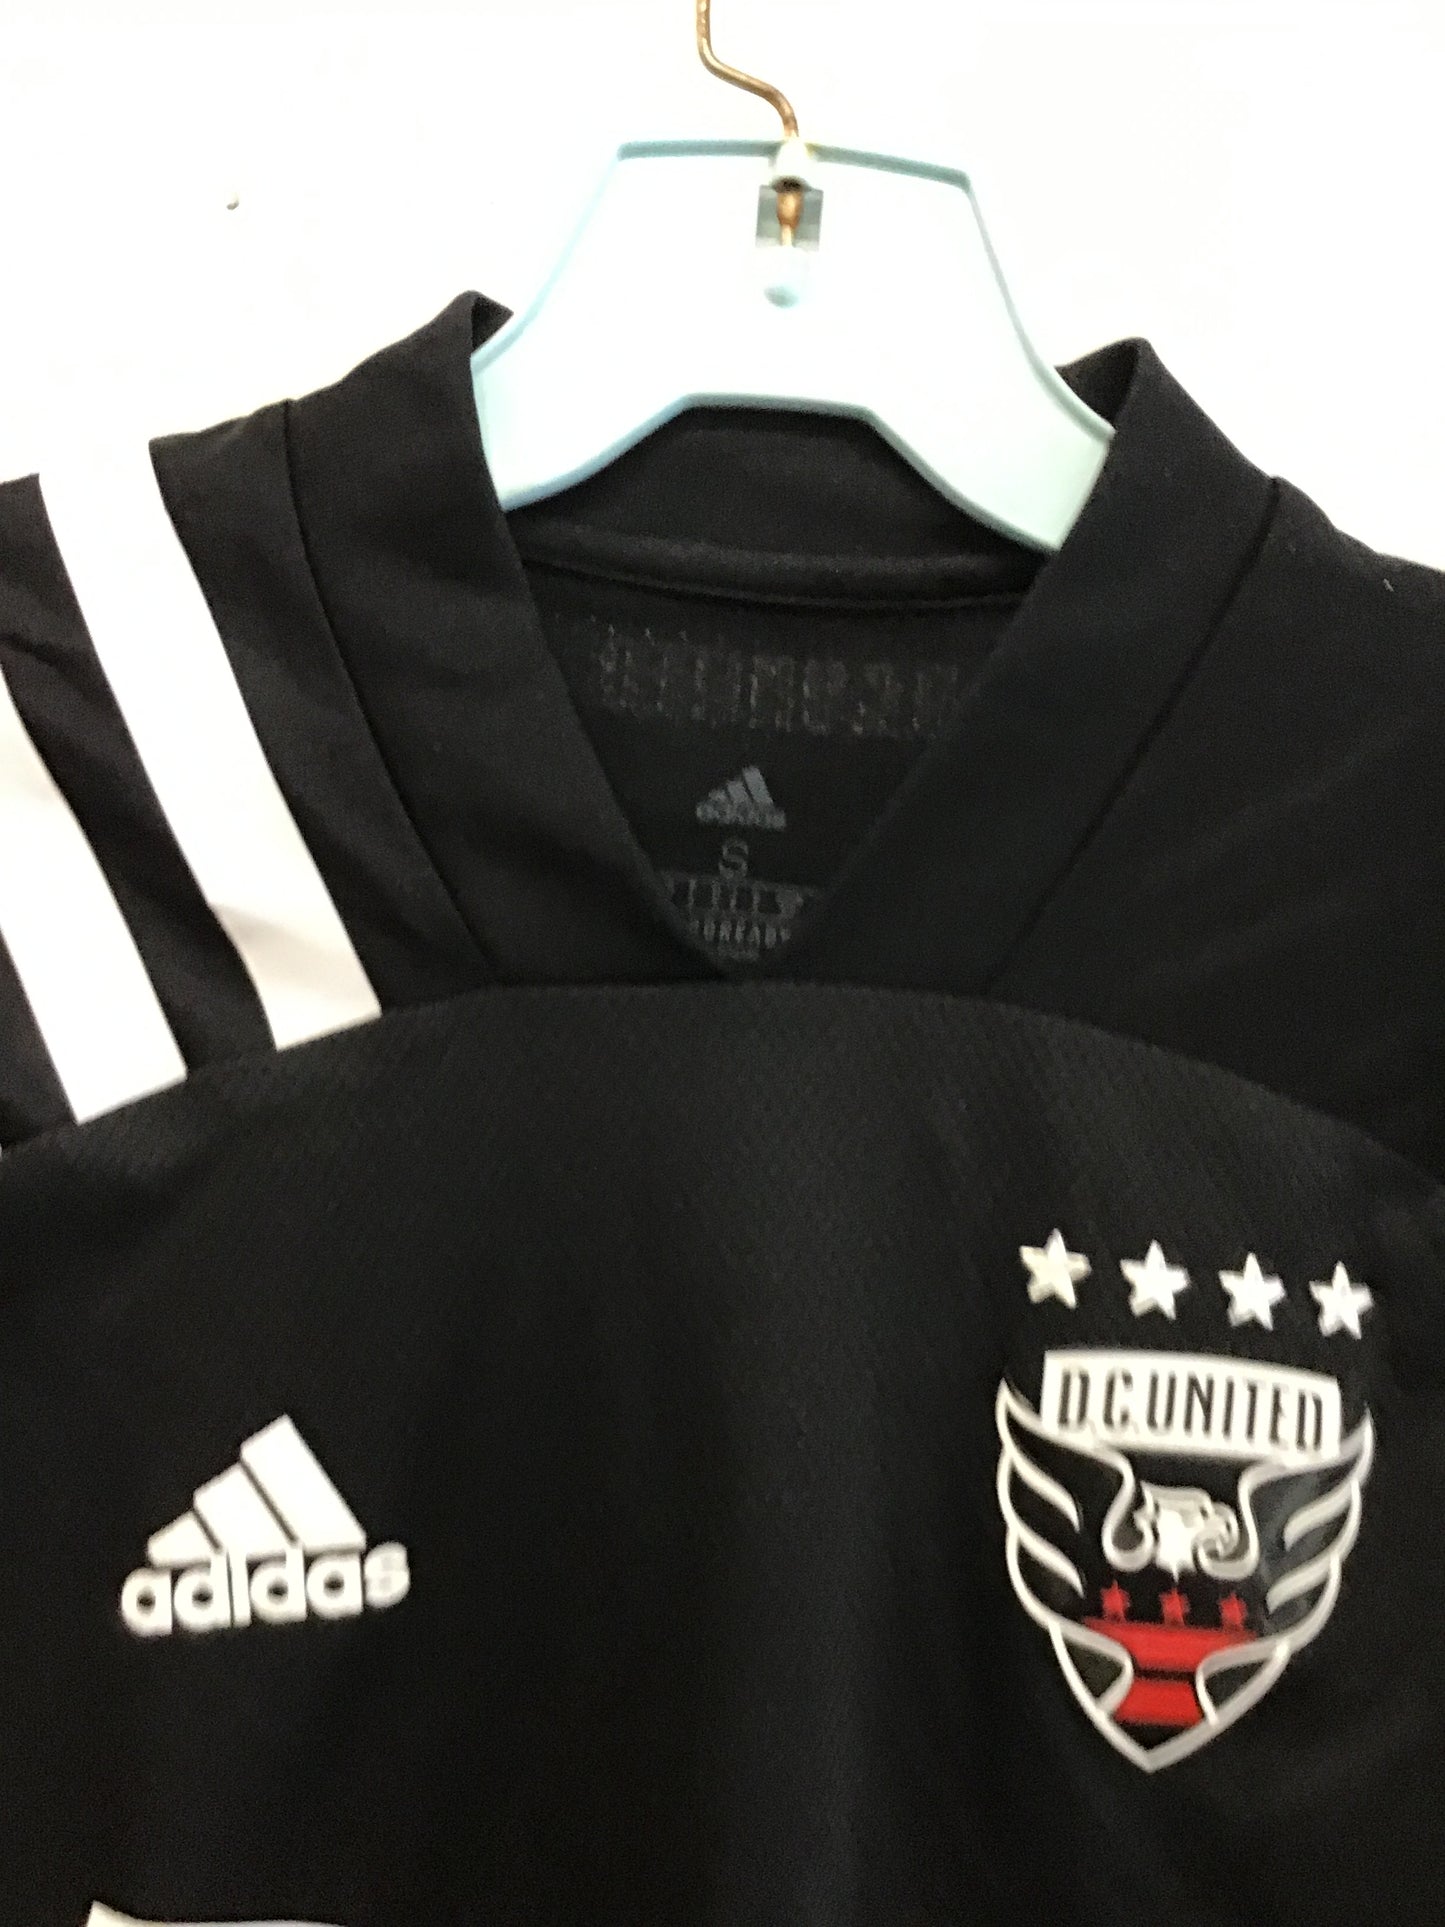 Adidas D.C. United 2020-2021 Jersey, Size S